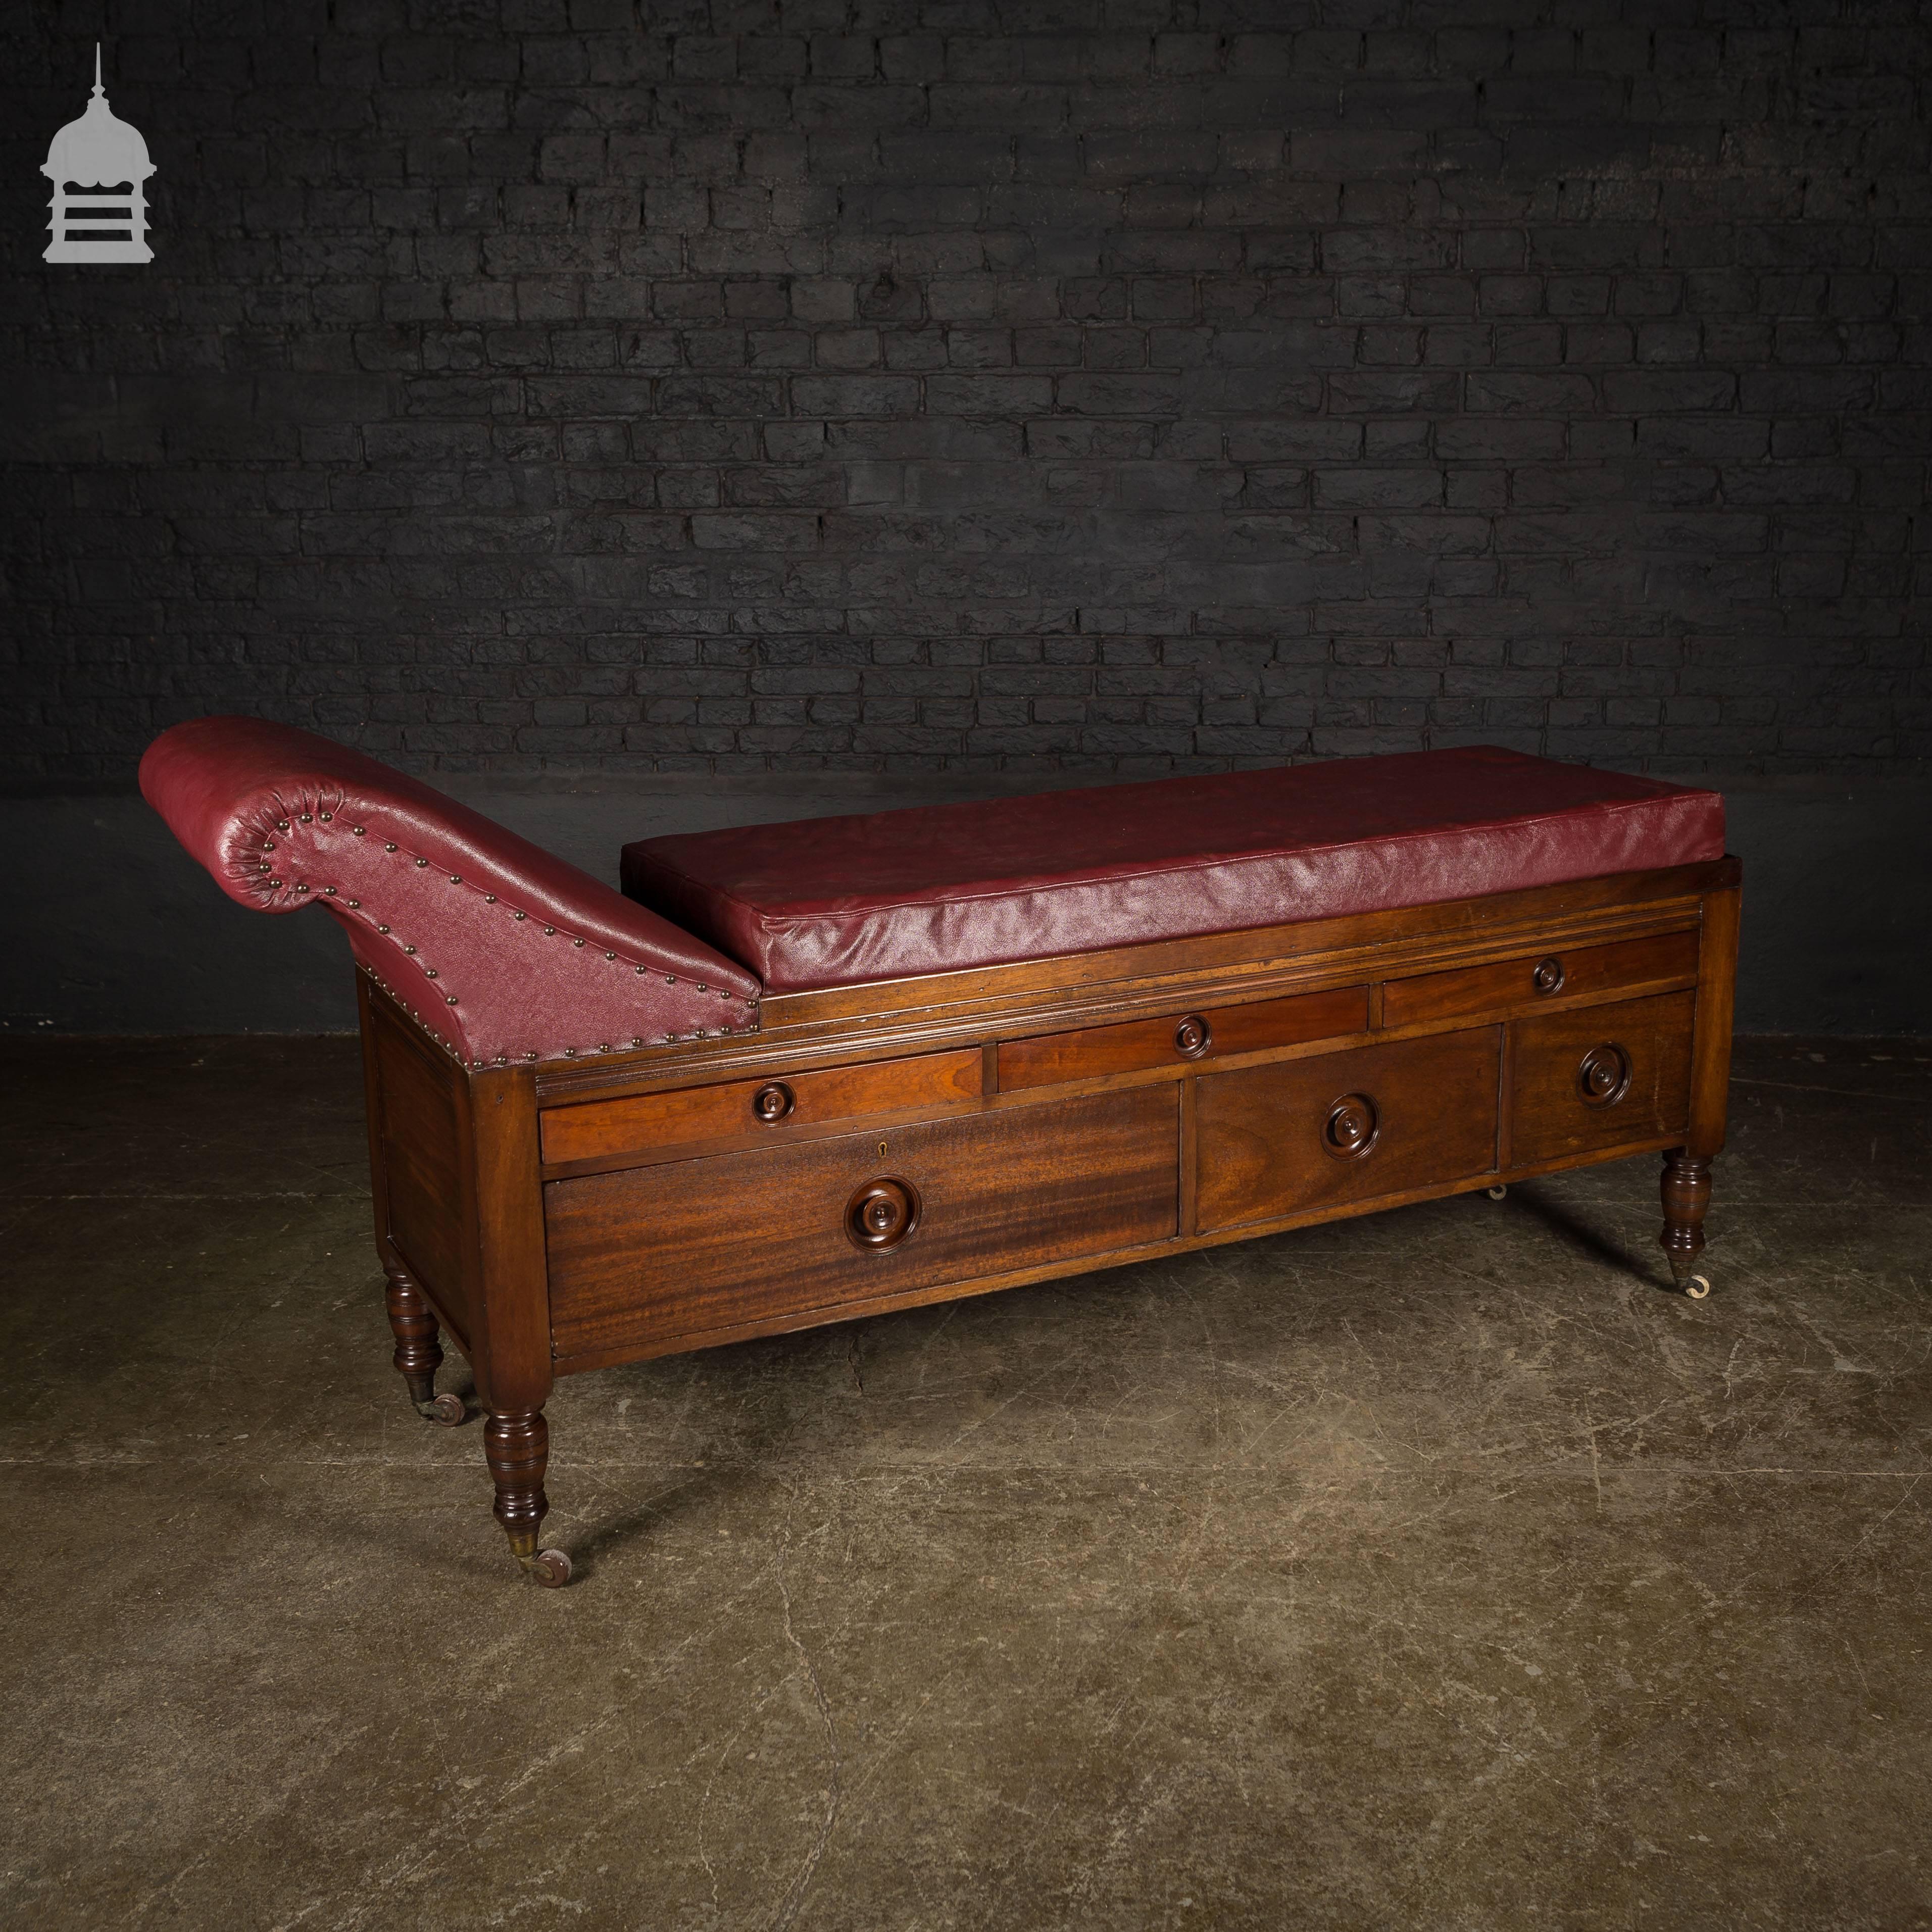 19th Century Mahogany Therapists Couch with Drawers and Inset Handles For Sale 3